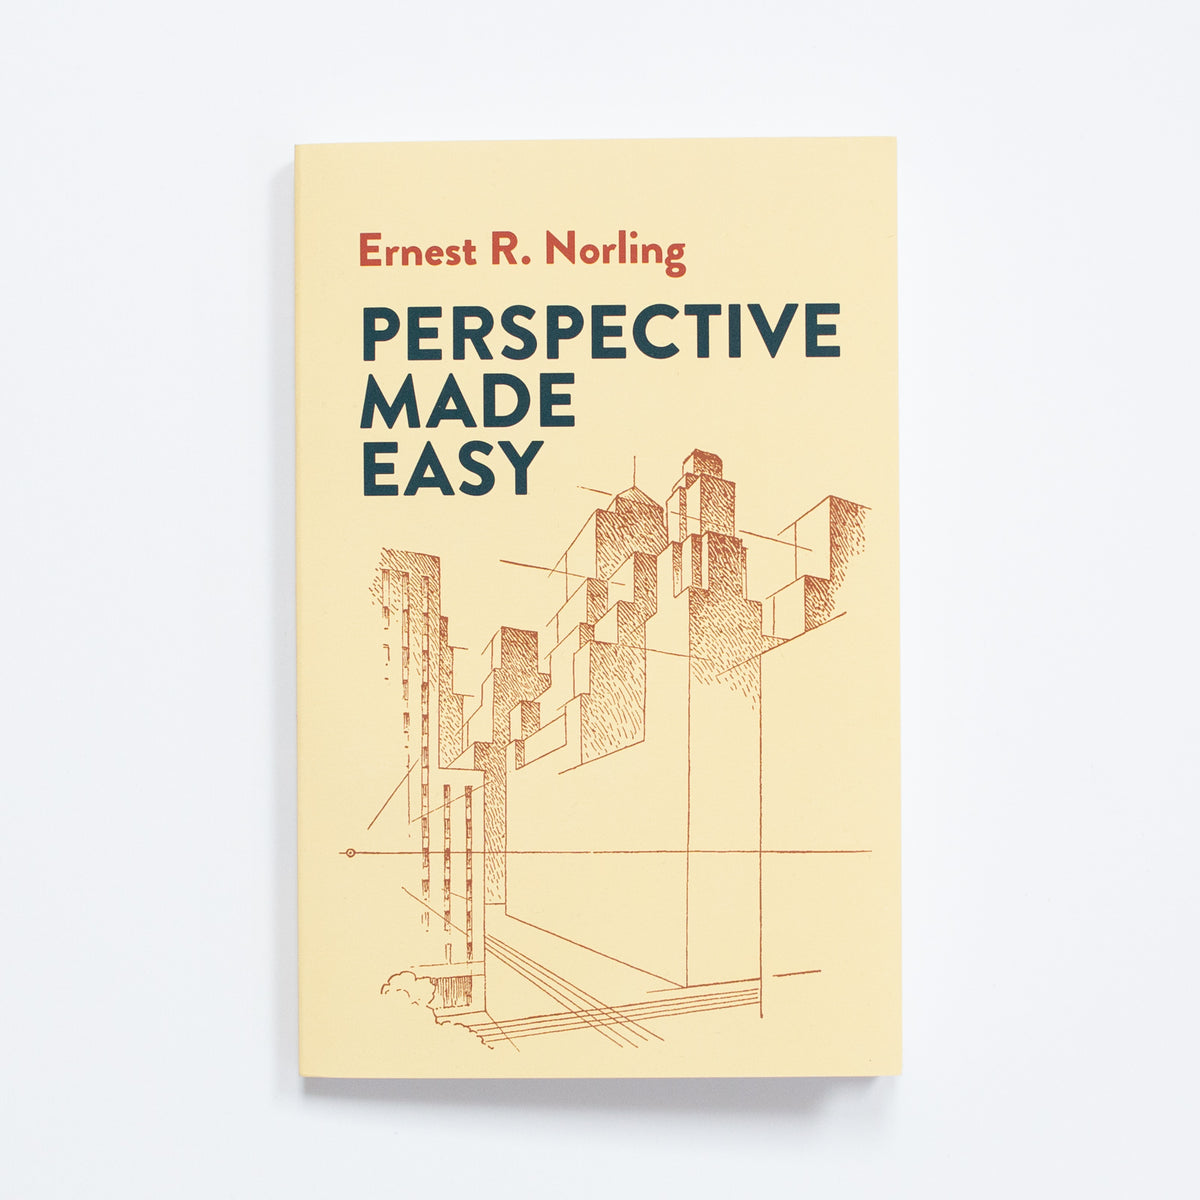 Perspective Made Easy by Ernest R. Norling